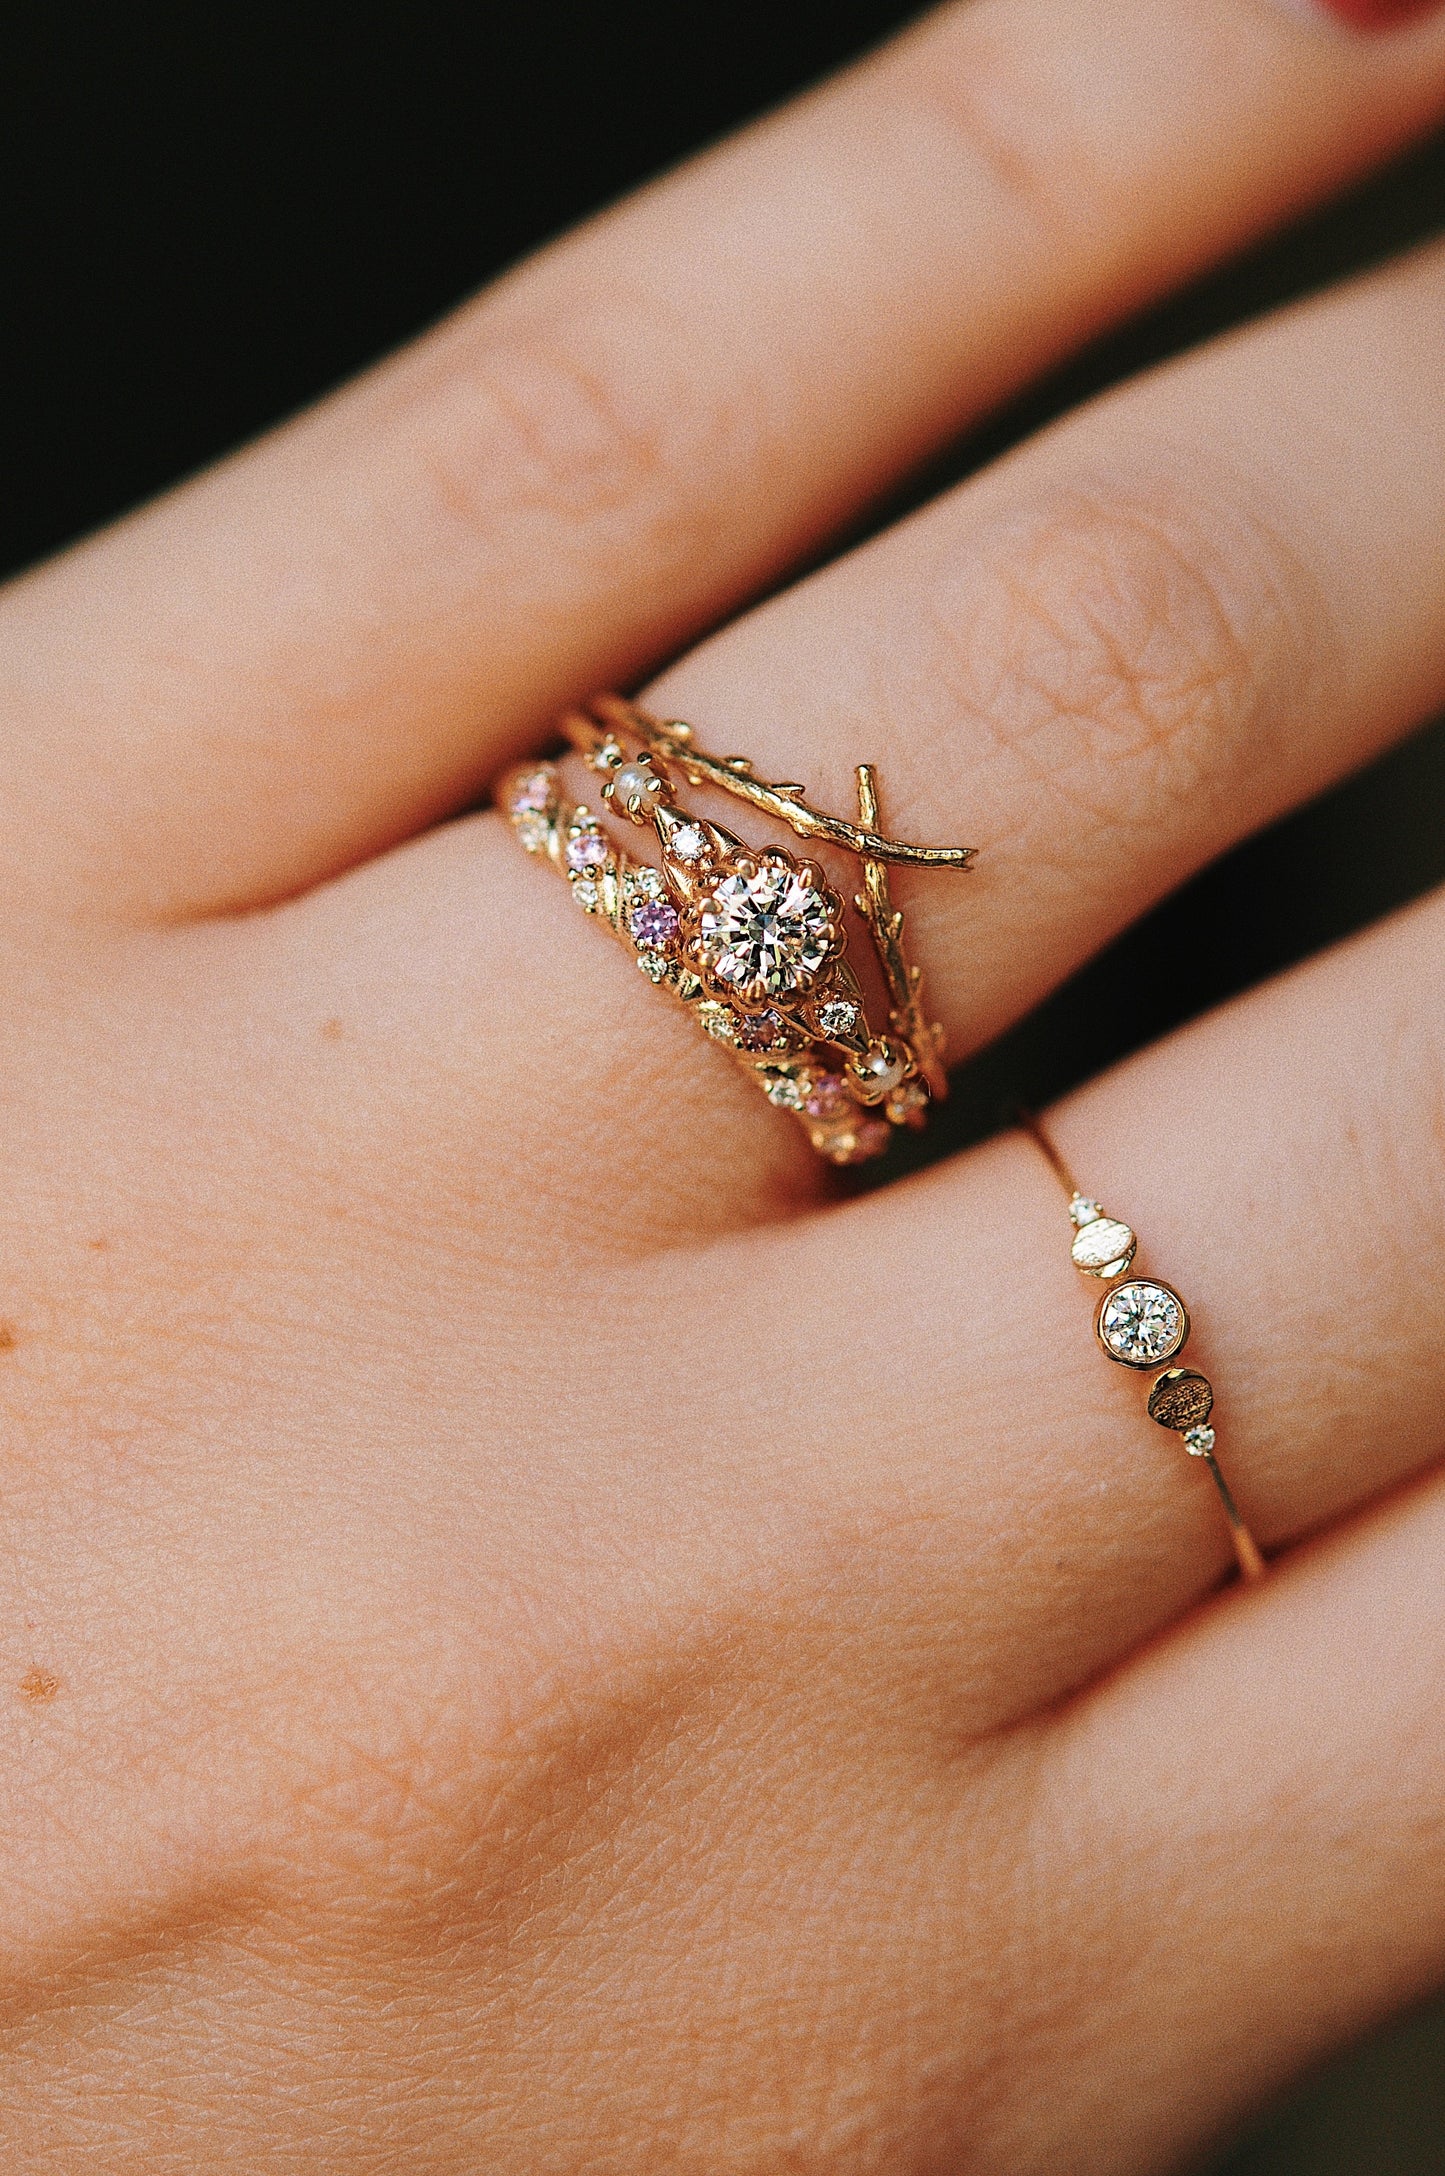 Baby Cosmic Witch Ring - Ready-to-ship